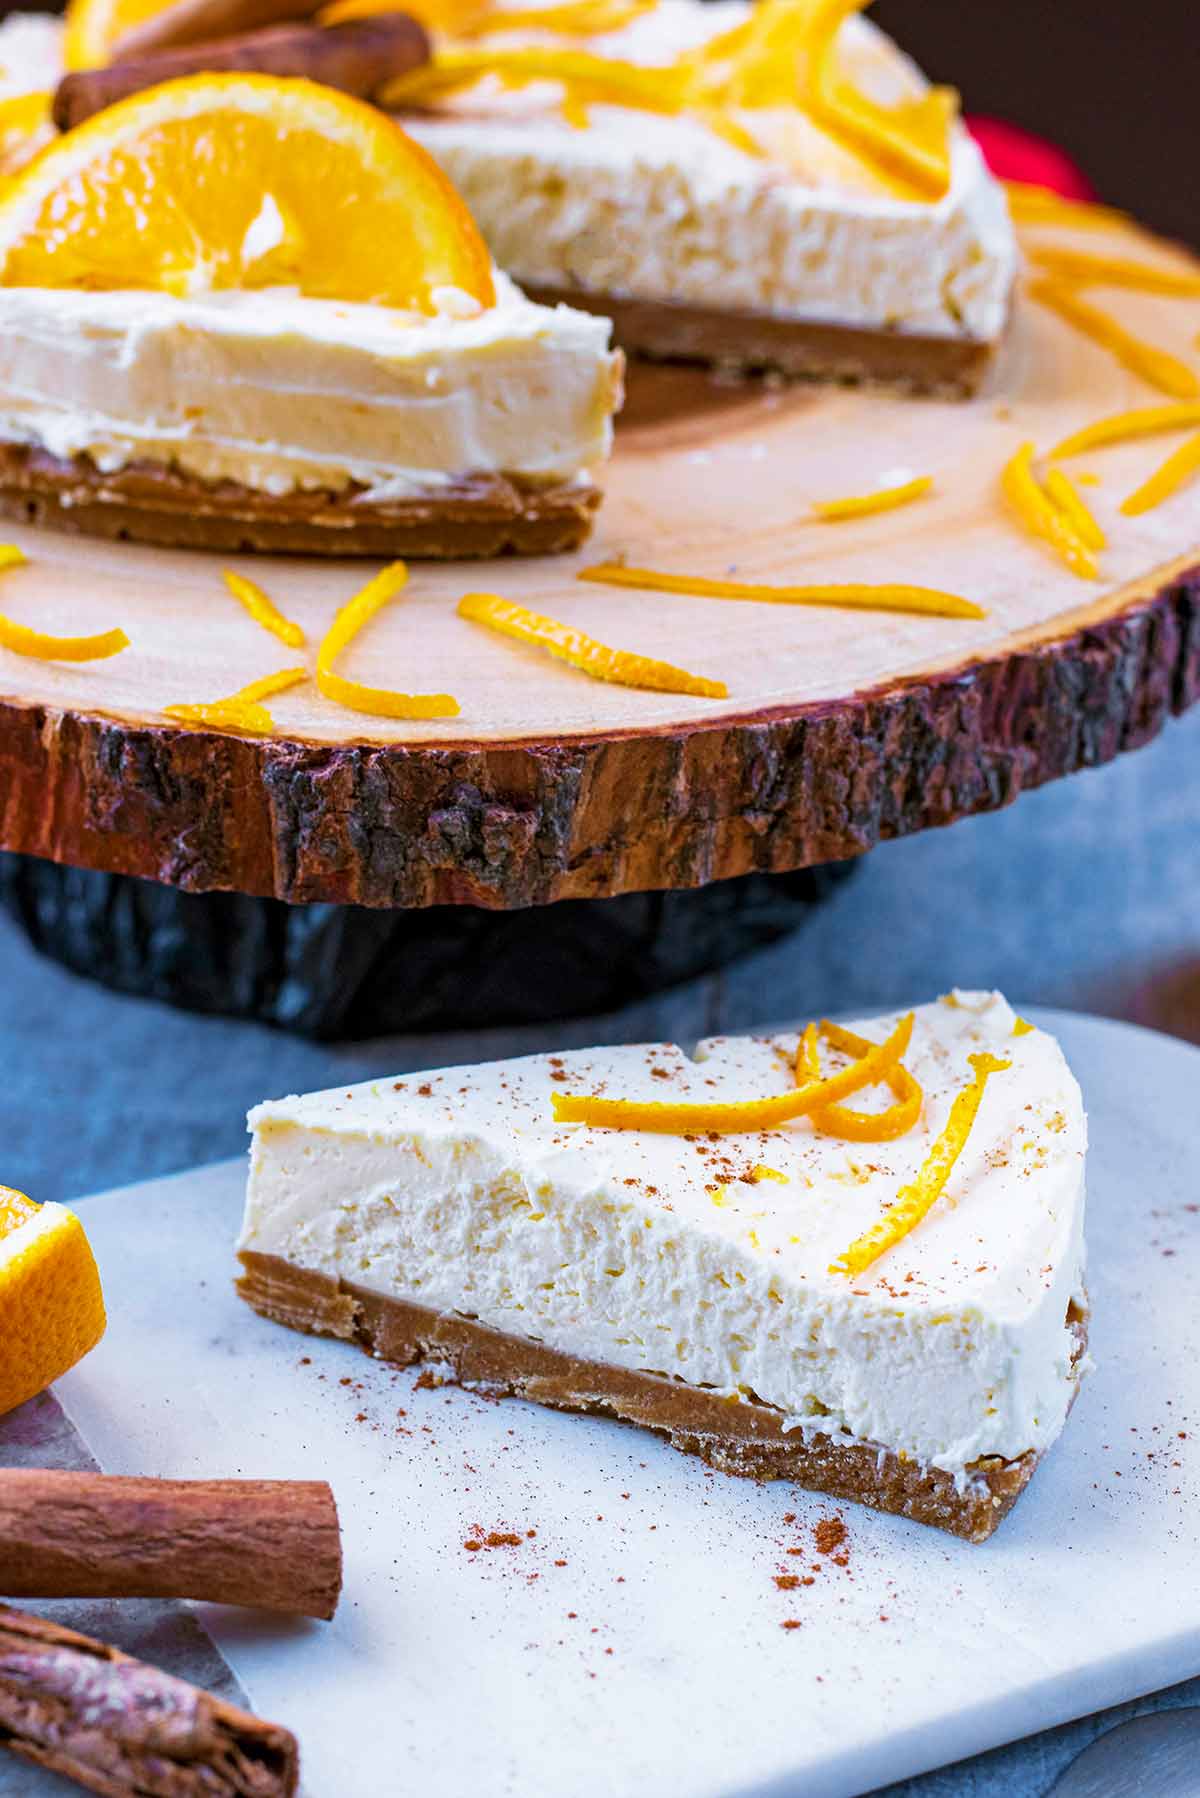 A slice of cheesecake on a serving board with the rest of the cheesecake in the background.